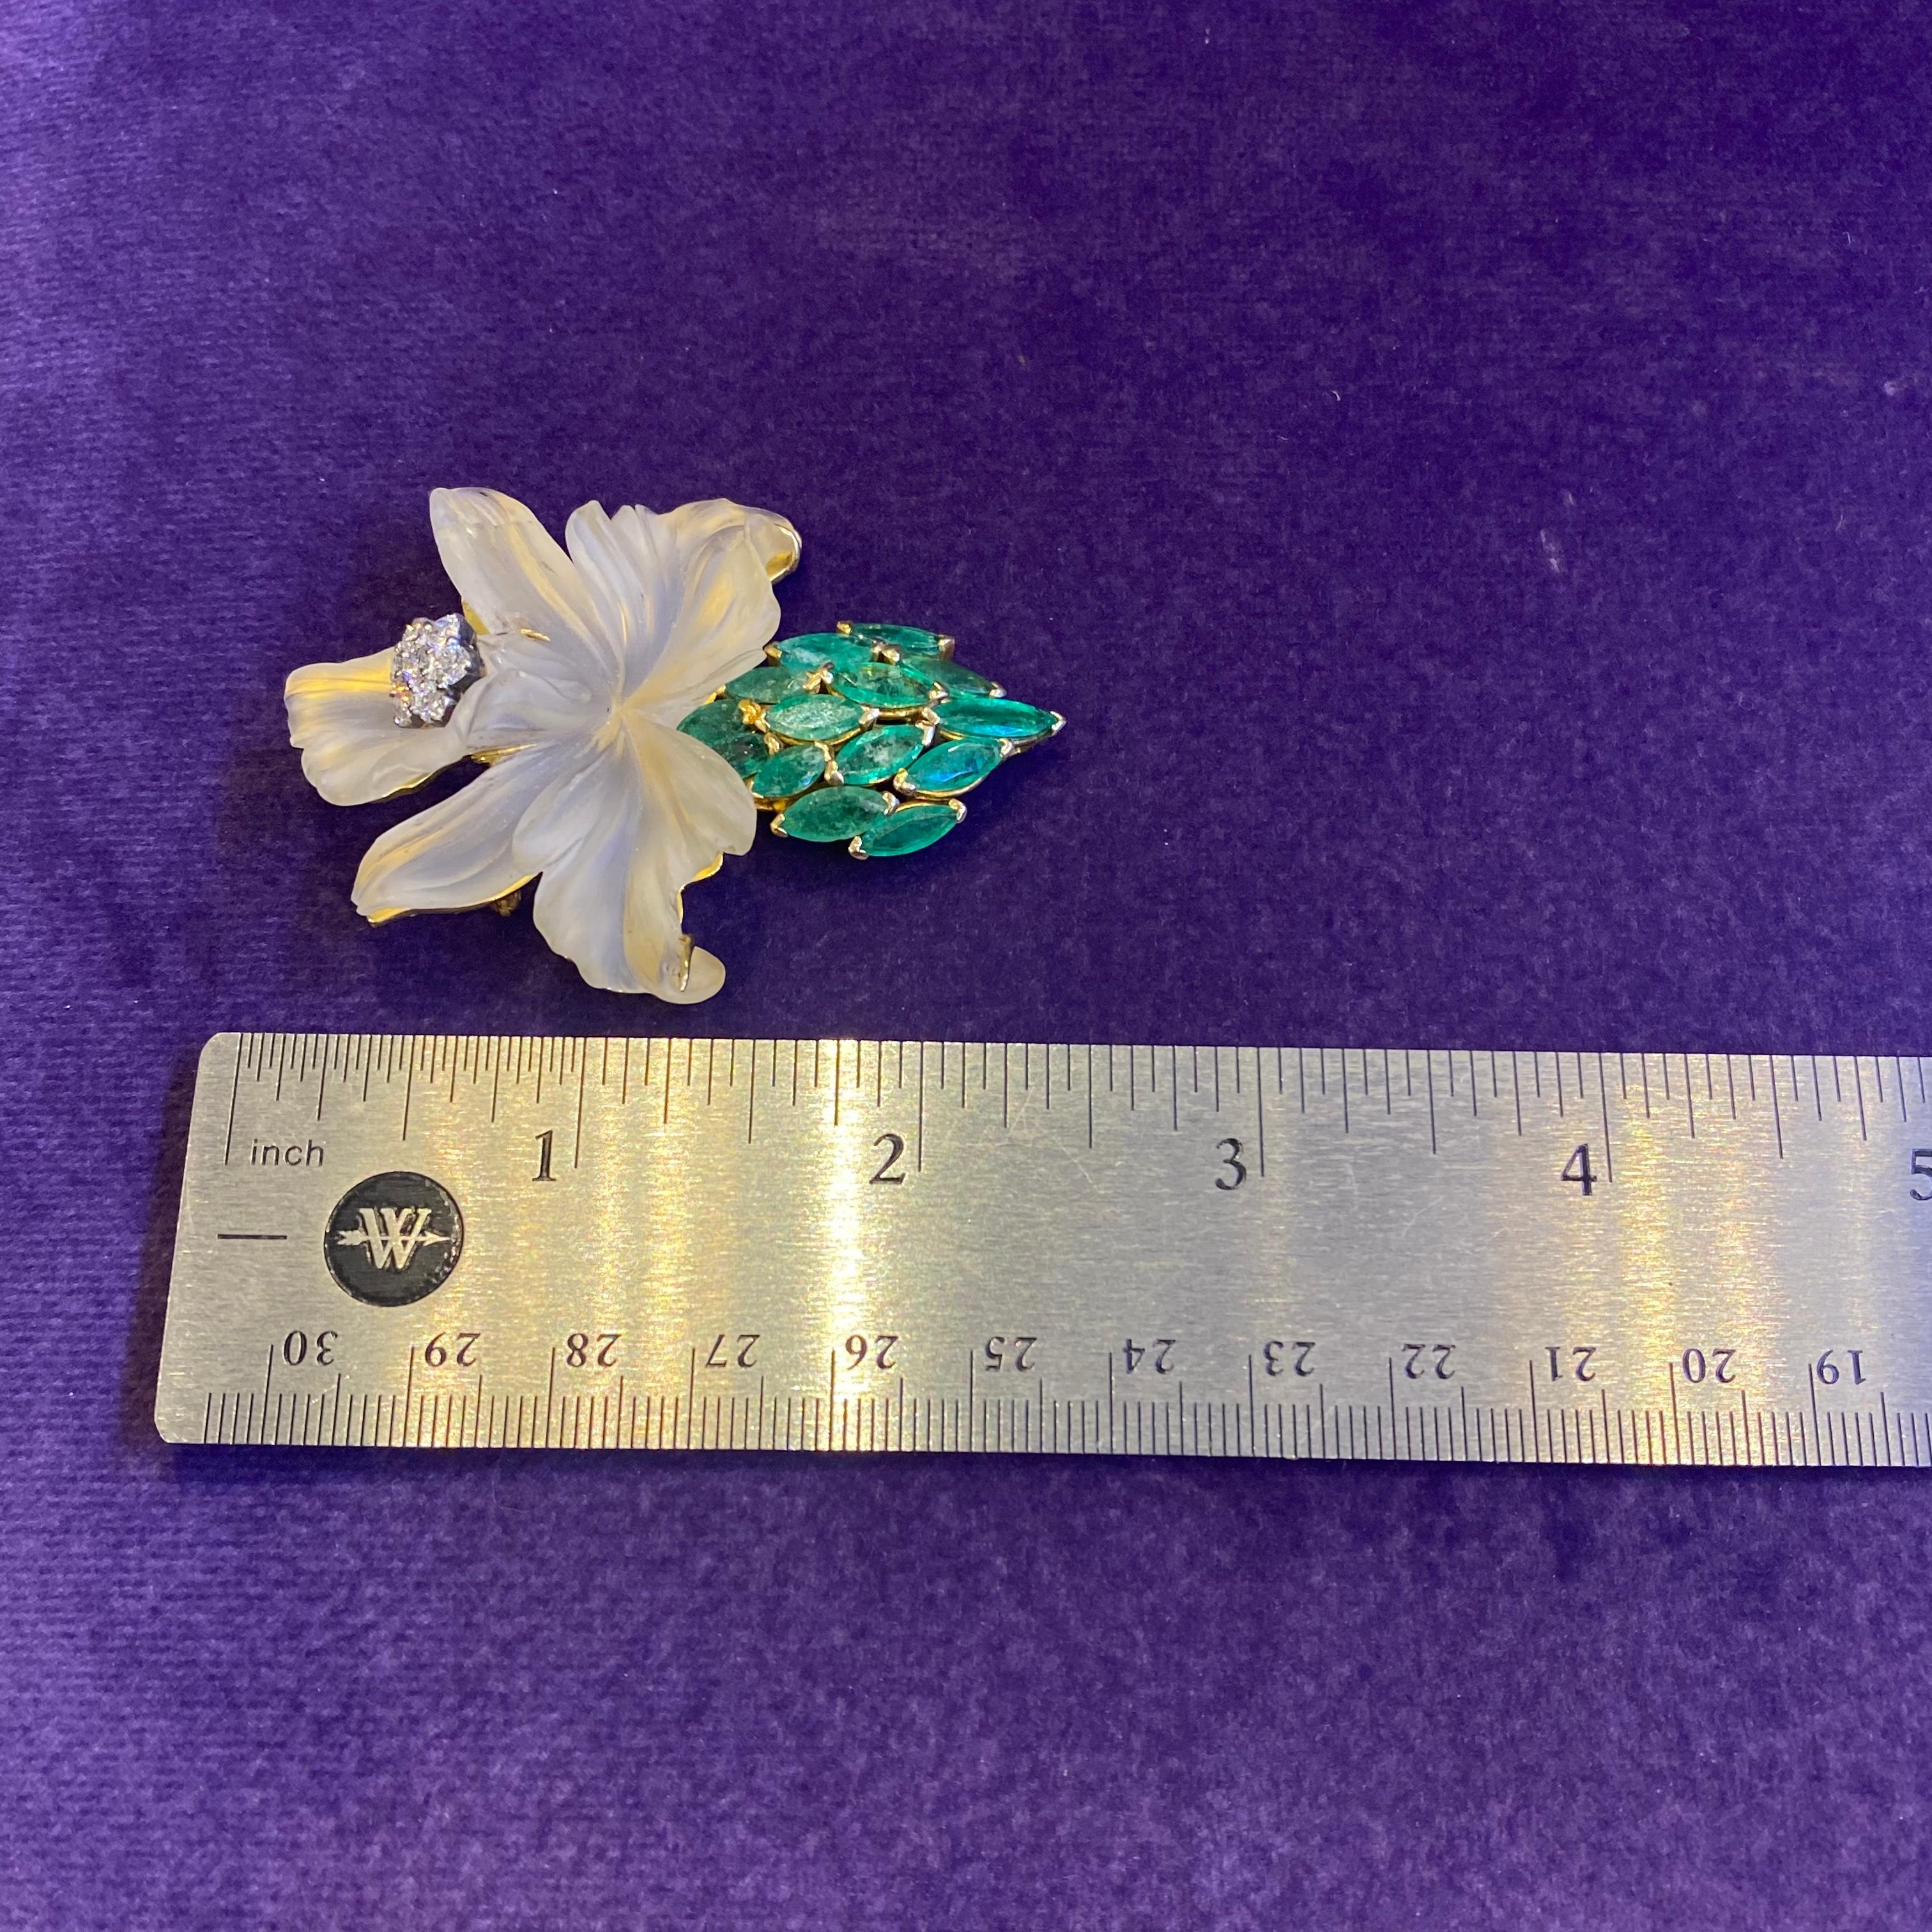 Tiffany & Co Flower Brooch In Excellent Condition For Sale In New York, NY